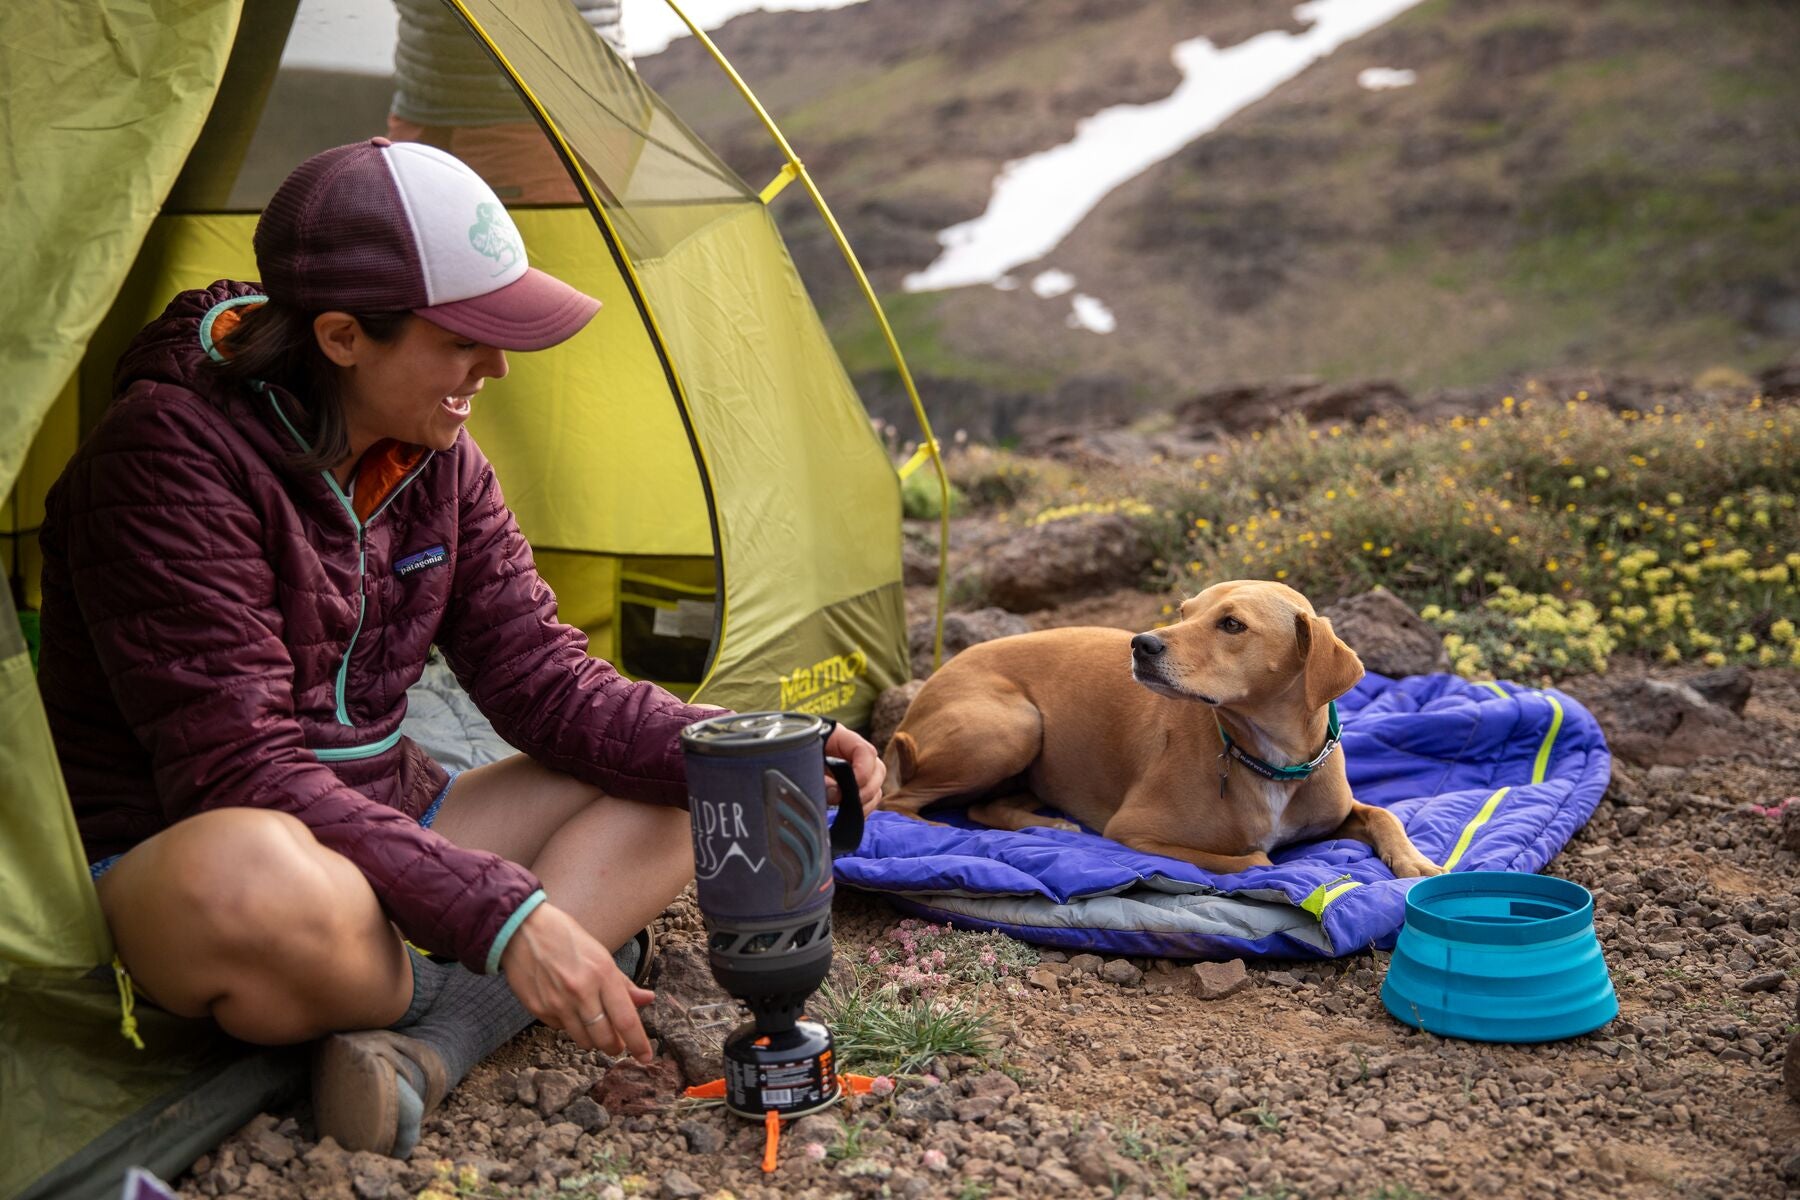 Human sitting in edge of tent cooking on her camp stove while dog sits next to her in Highlands dog sleeping bag.